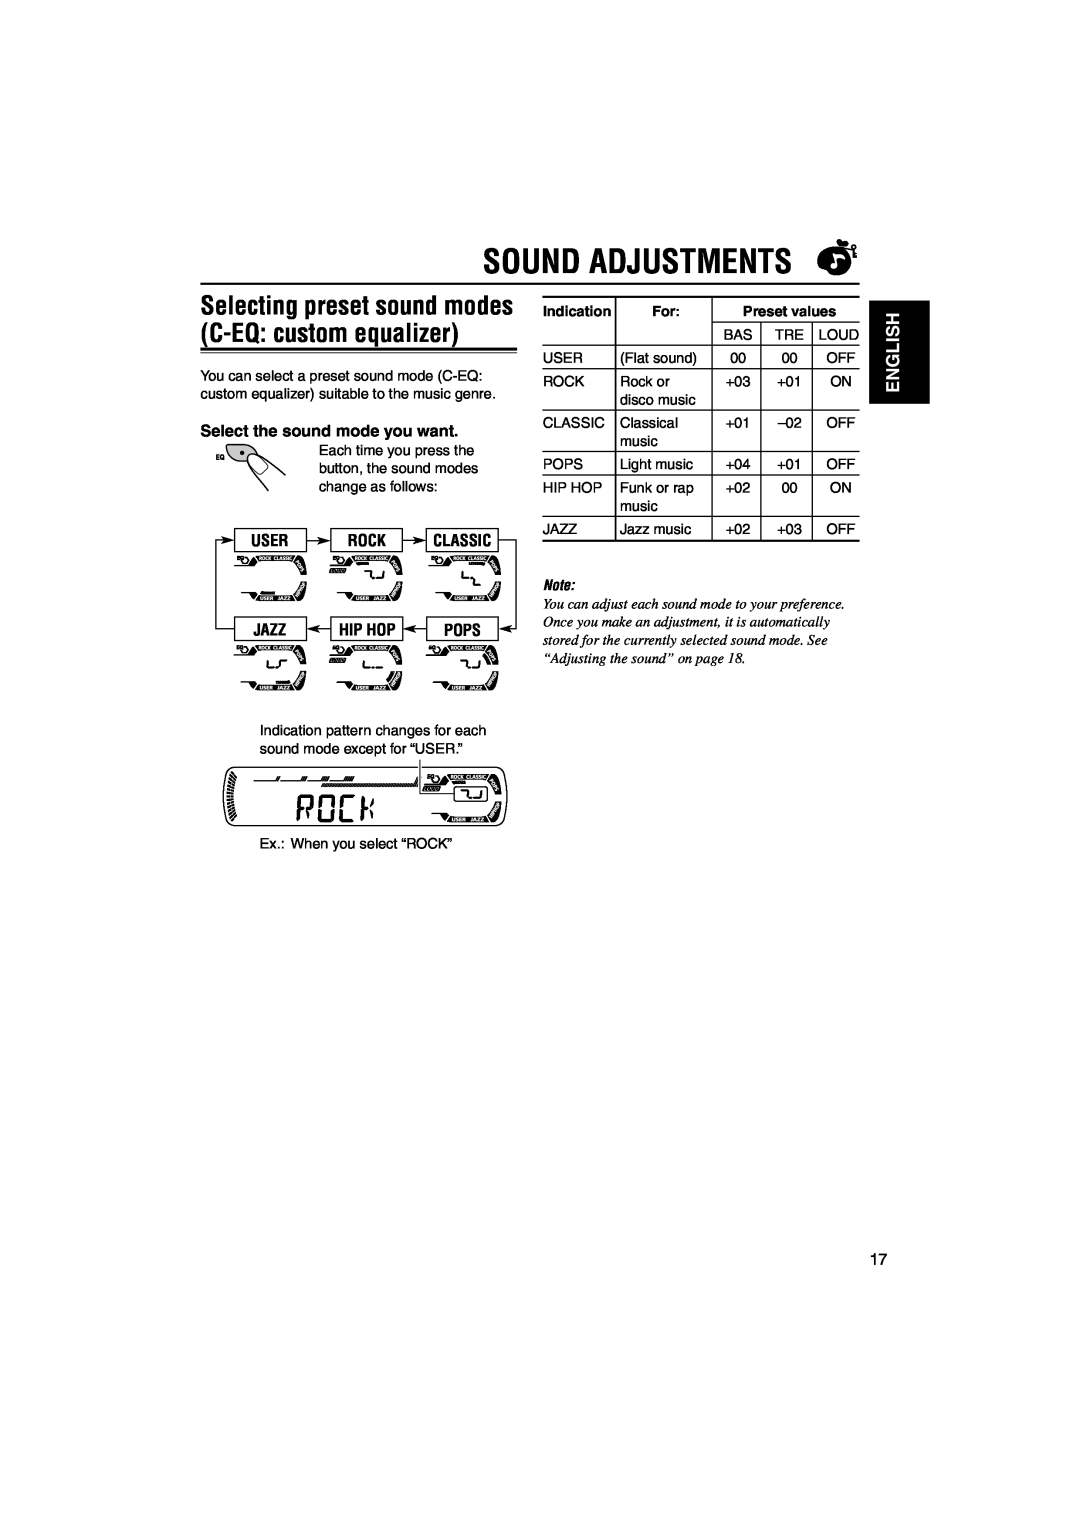 JVC KD-G210 Sound Adjustments, Select the sound mode you want, User Rock Classic, Jazz, Hip Hop, Pops, English, Indication 